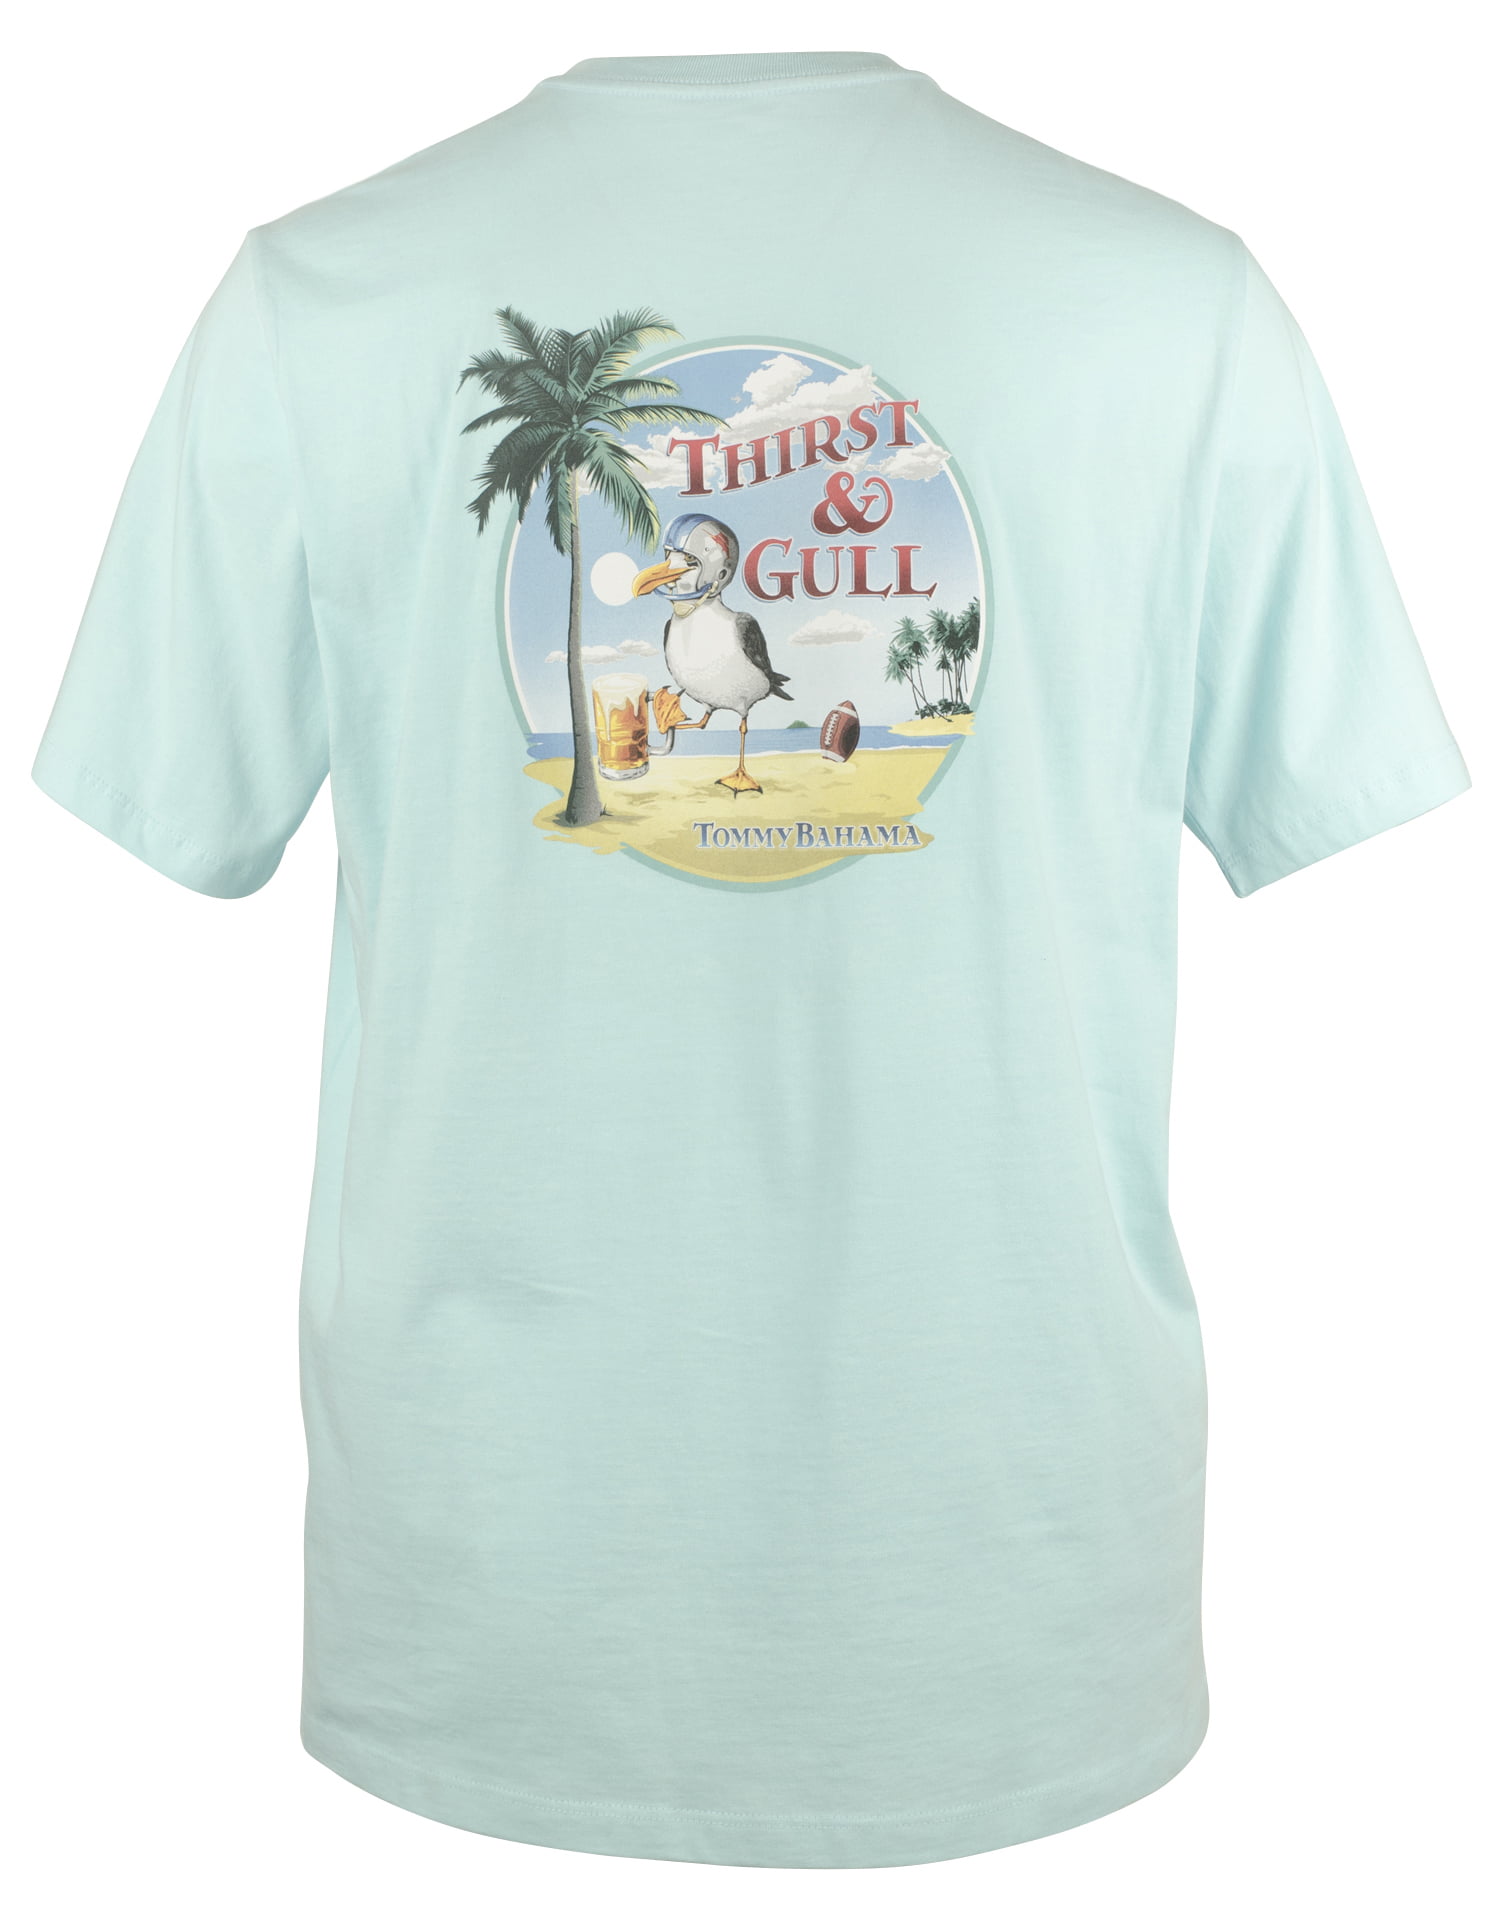 tommy bahama graphic tees